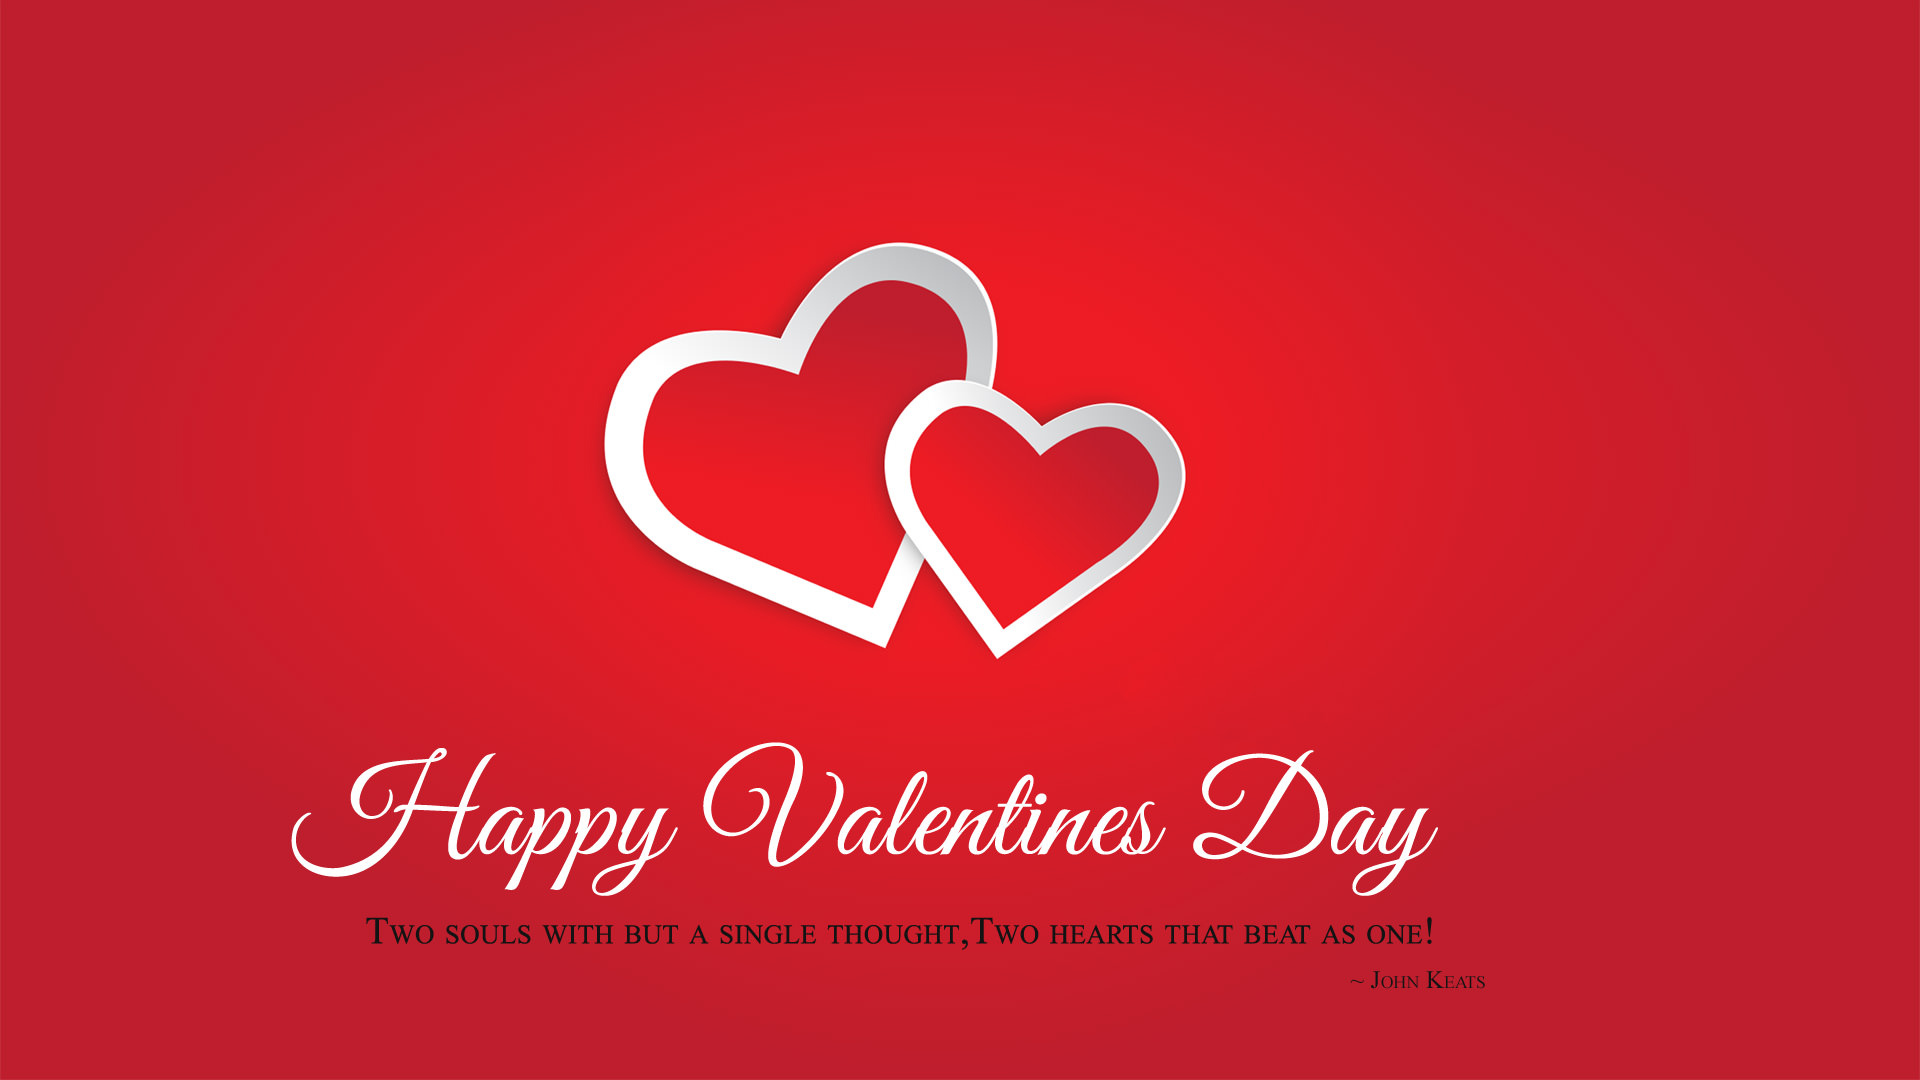  Feb Happy Valentines Day Wallpaper Full HD Special Love Images